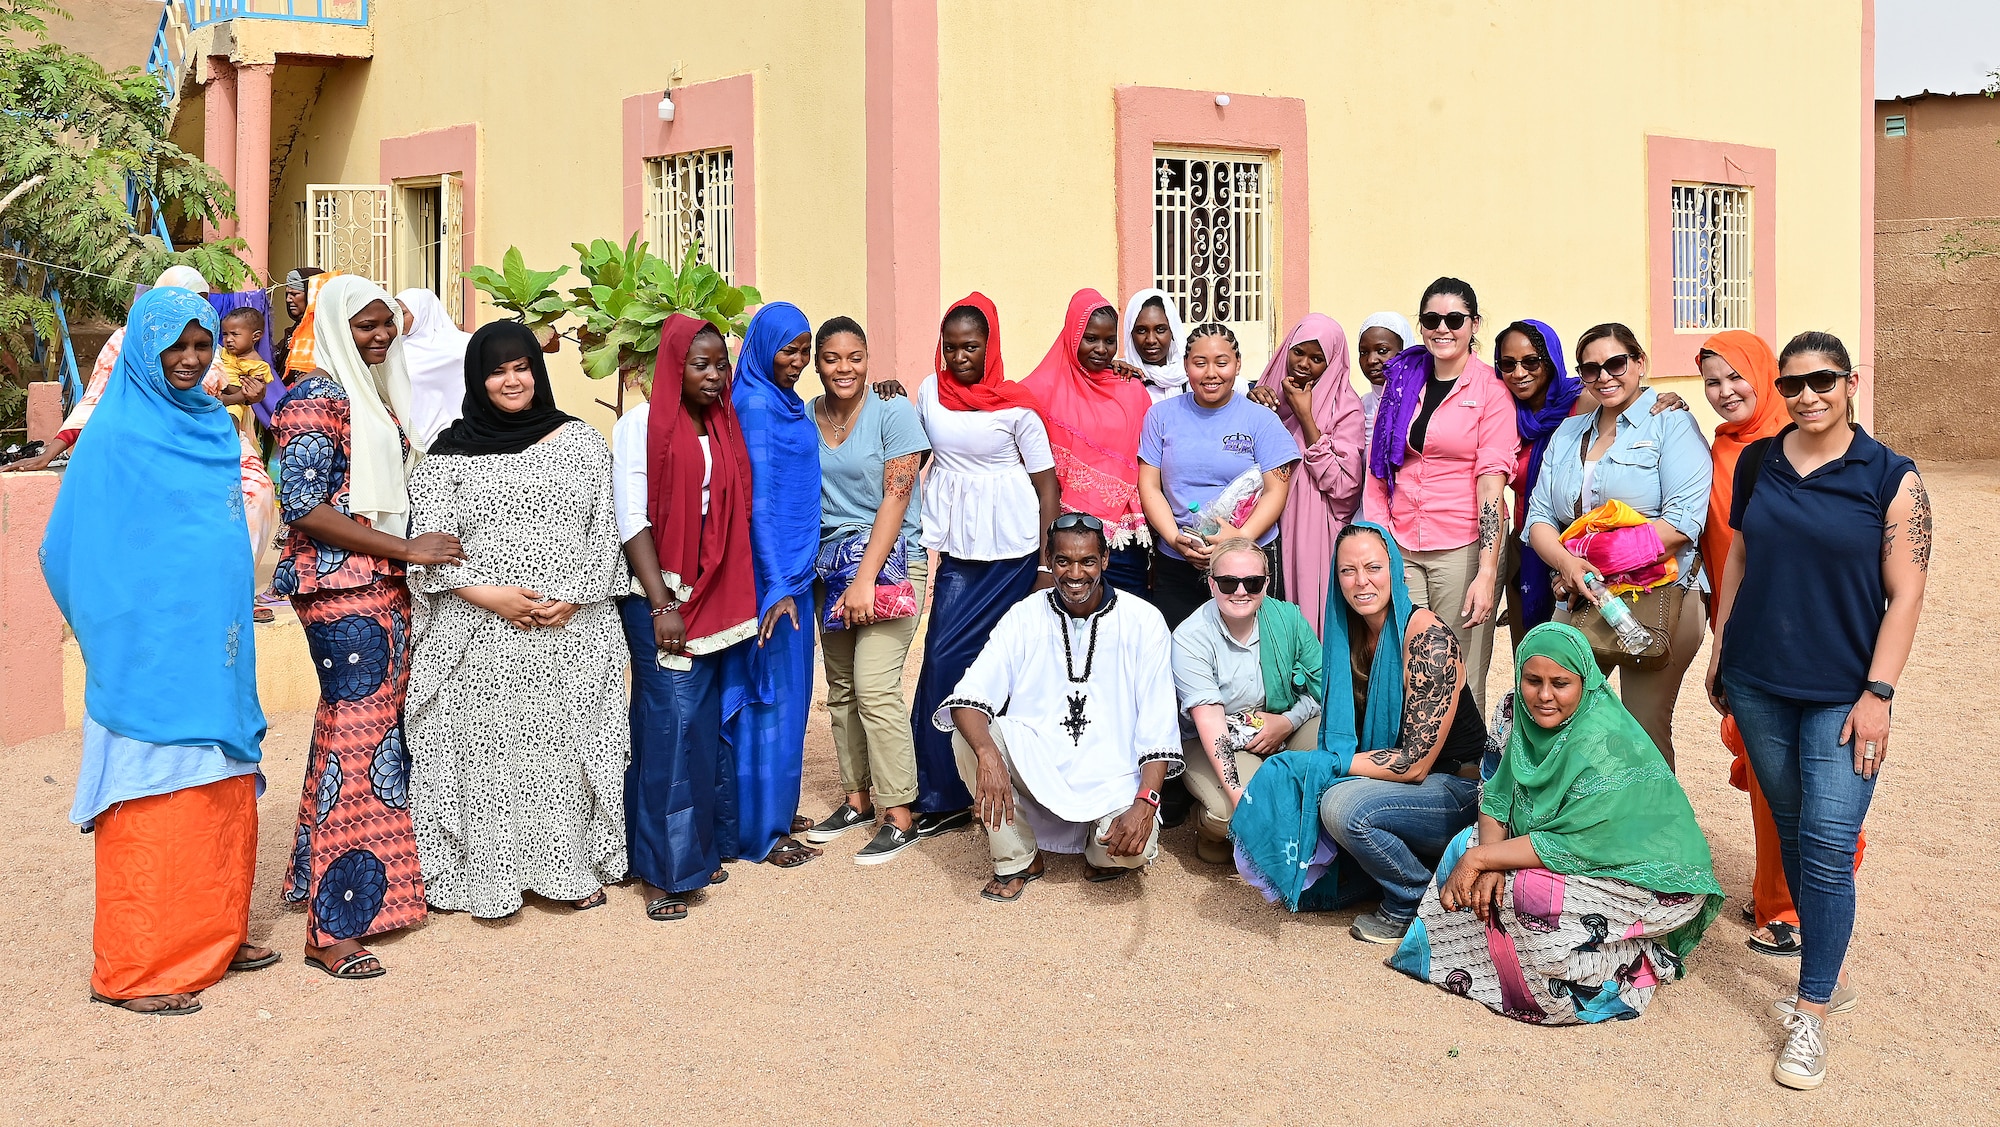 The Air Base 201 Women’s Association and Tedhilt Women’s Association pose for a group photo during an International Women’s Day celebration in Agadez, Niger, March 6, 2022. International Women’s Day (March 8) is a global day celebrating the social, economic, cultural, and political achievements of women. It also raises awareness against bias and accelerates gender equality. (U.S. Air Force photo by Tech. Sgt. Stephanie Longoria)